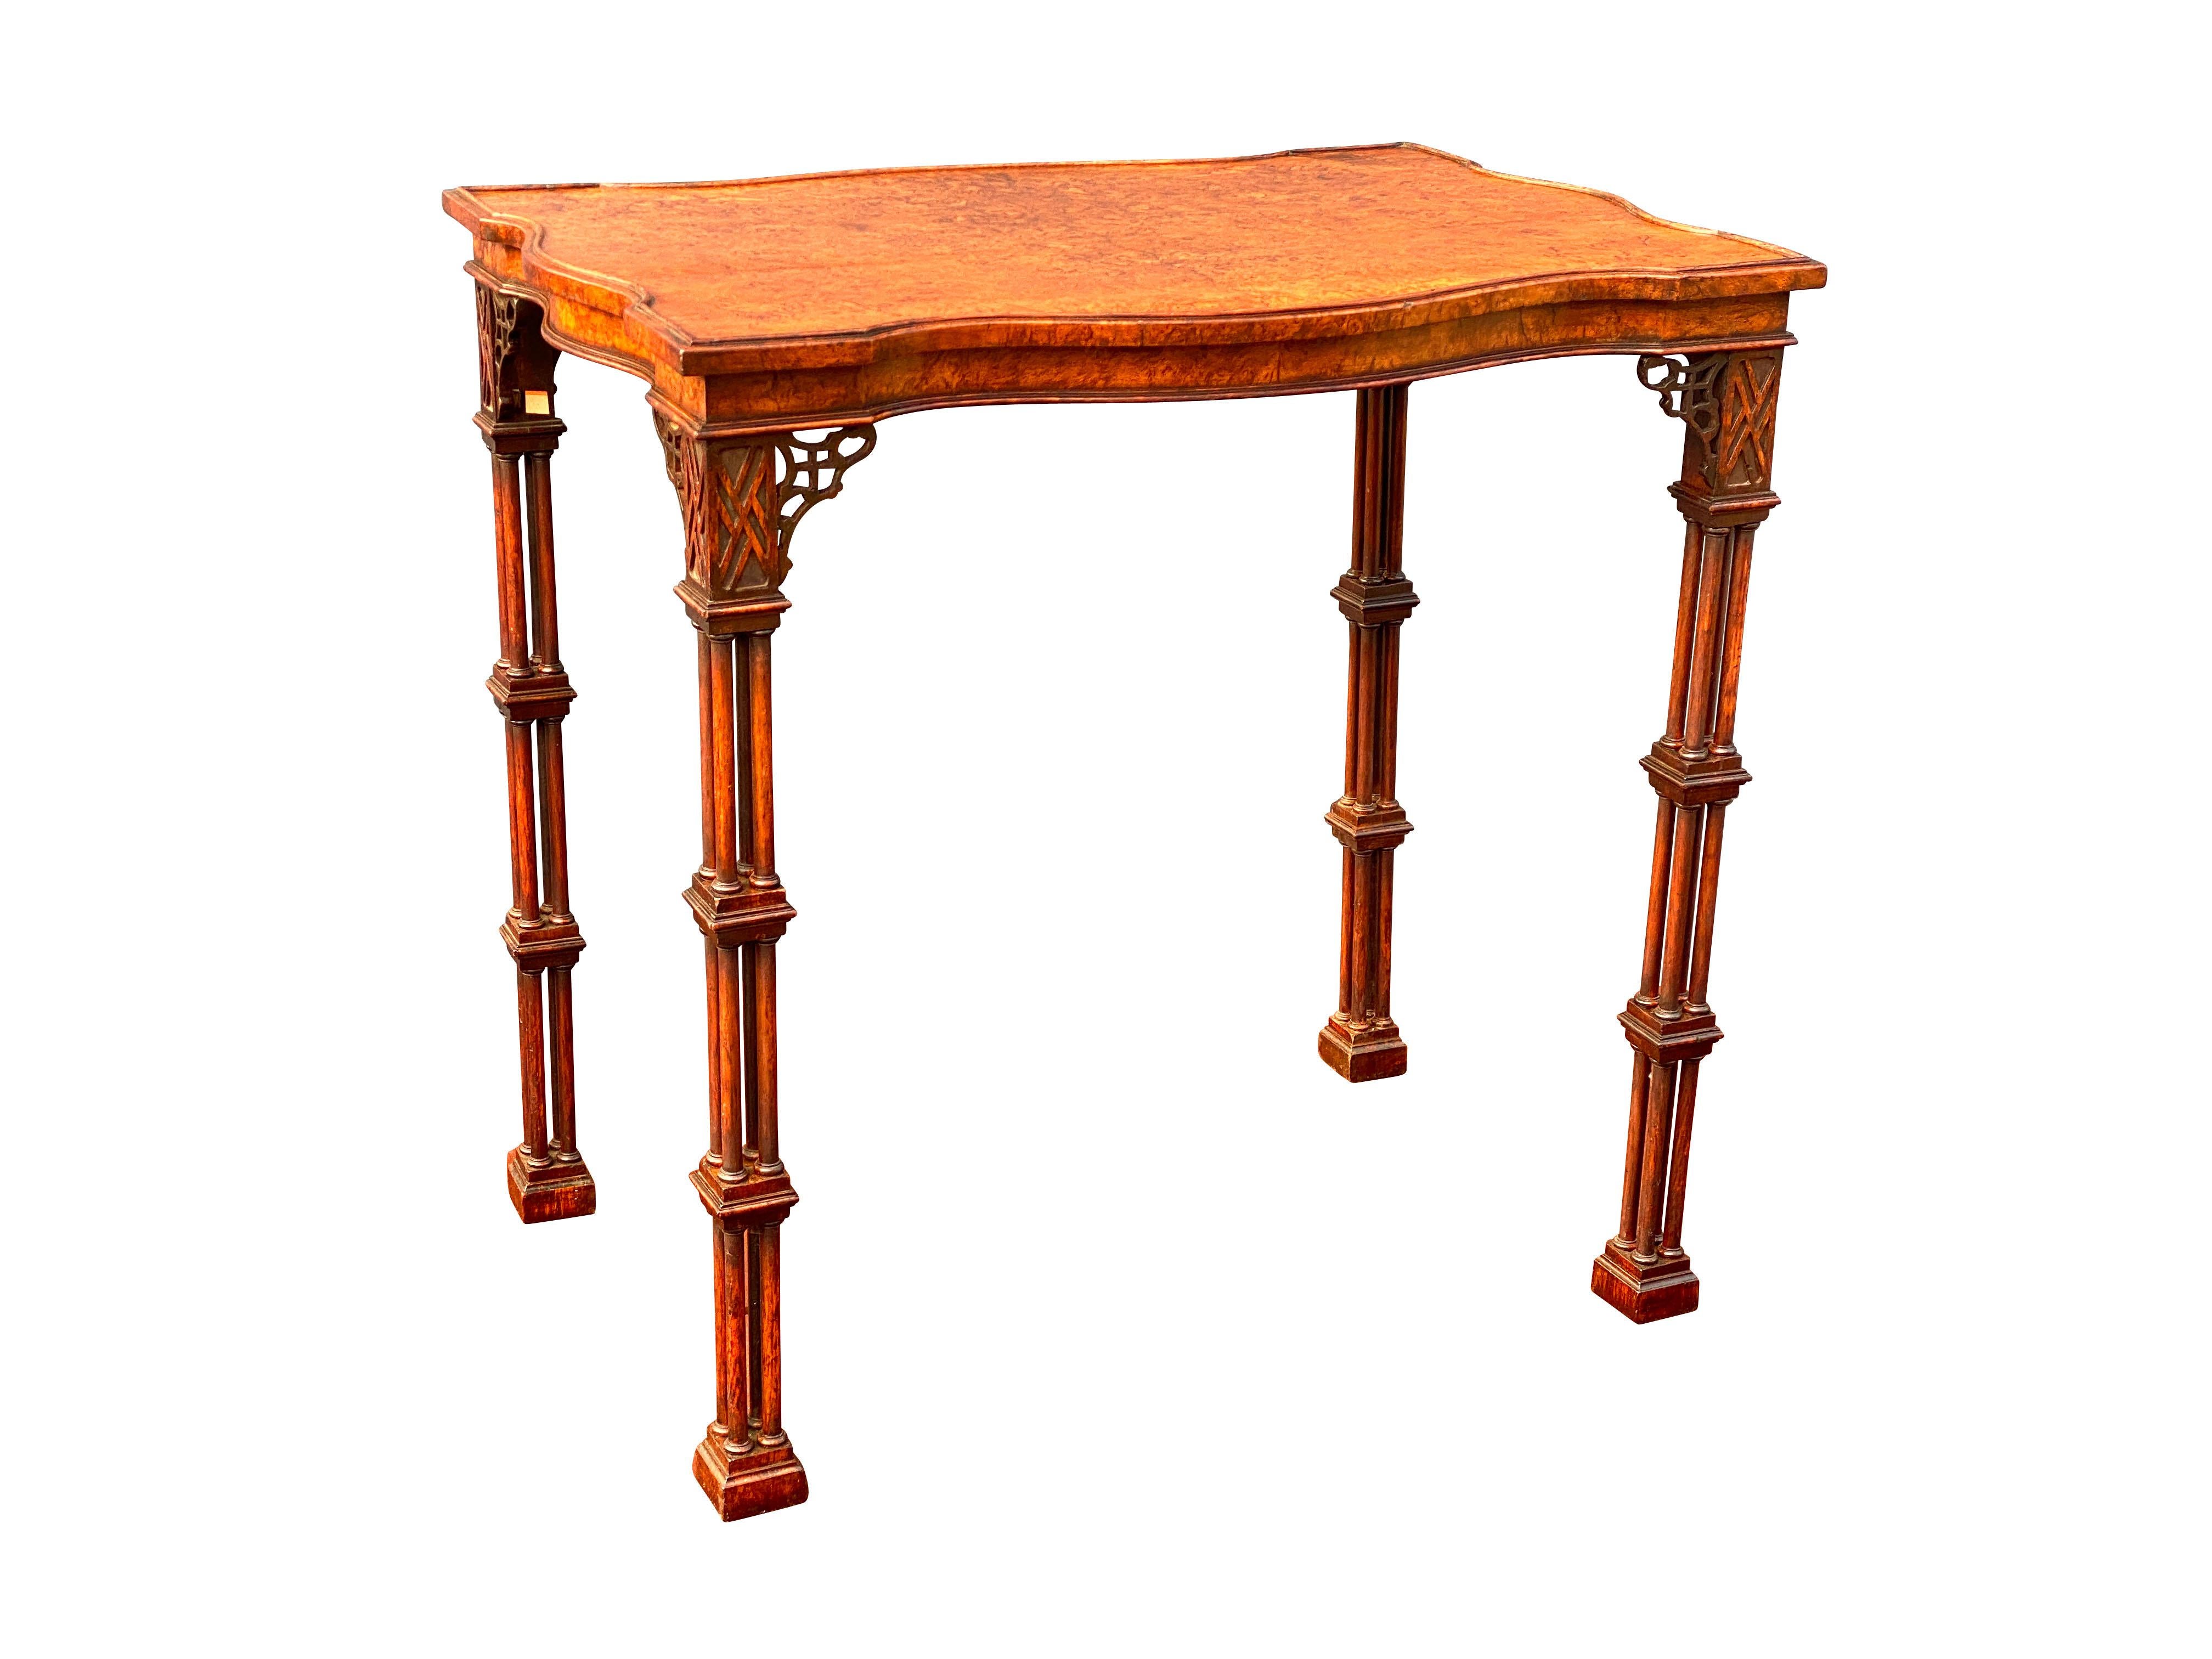 Finely made with a wonderful burl veneer top of serpentine shape raised on cluster column legs headed by blind fretwork and fretwork spandrels. The conforming frieze with same burl walnut. Block feet. A very similar example made ca 1828 by Gillows